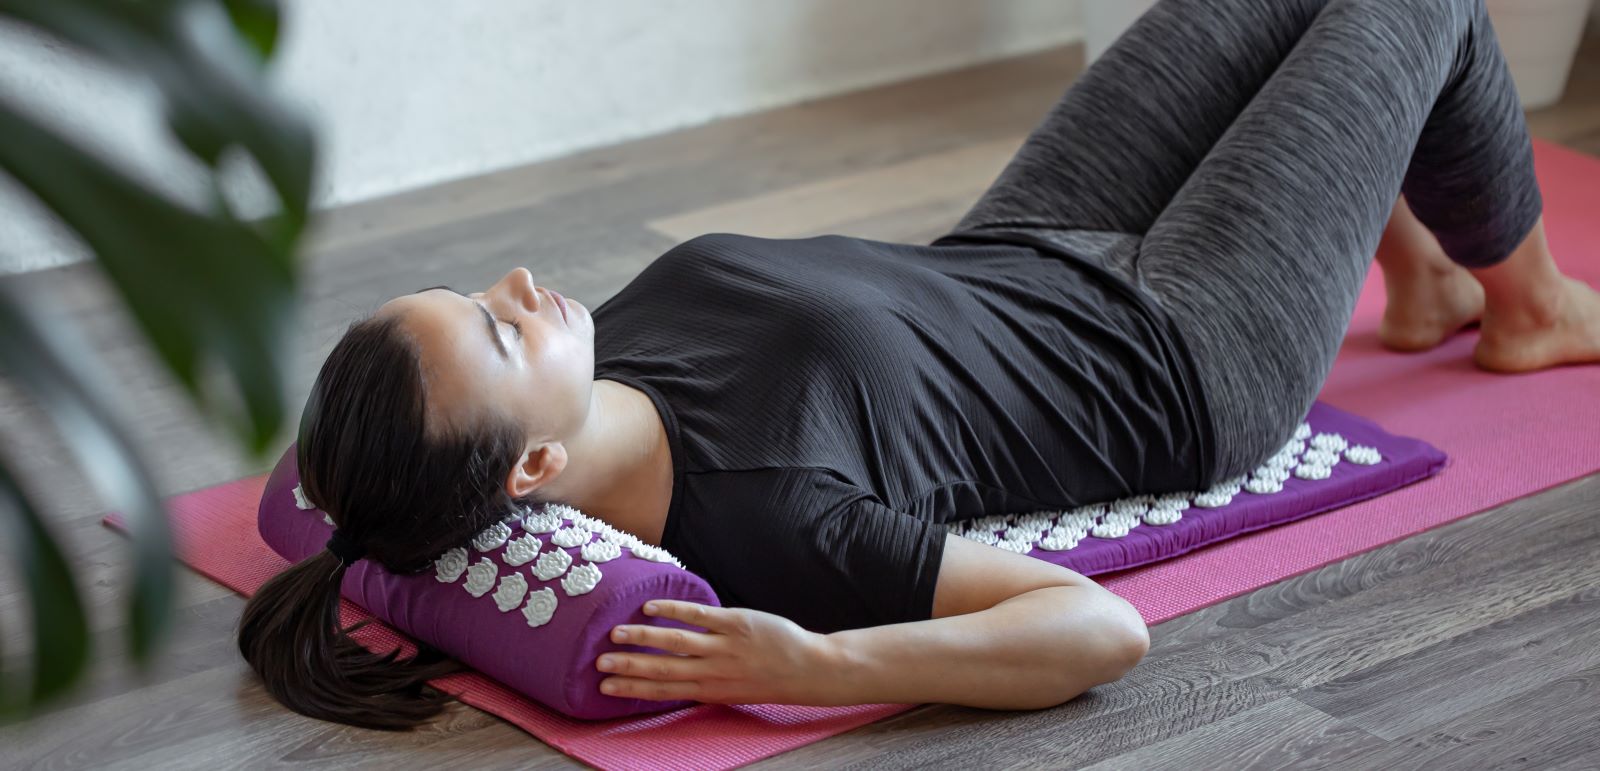 Can Acupressure Mats Really Help With Chronic Pain?